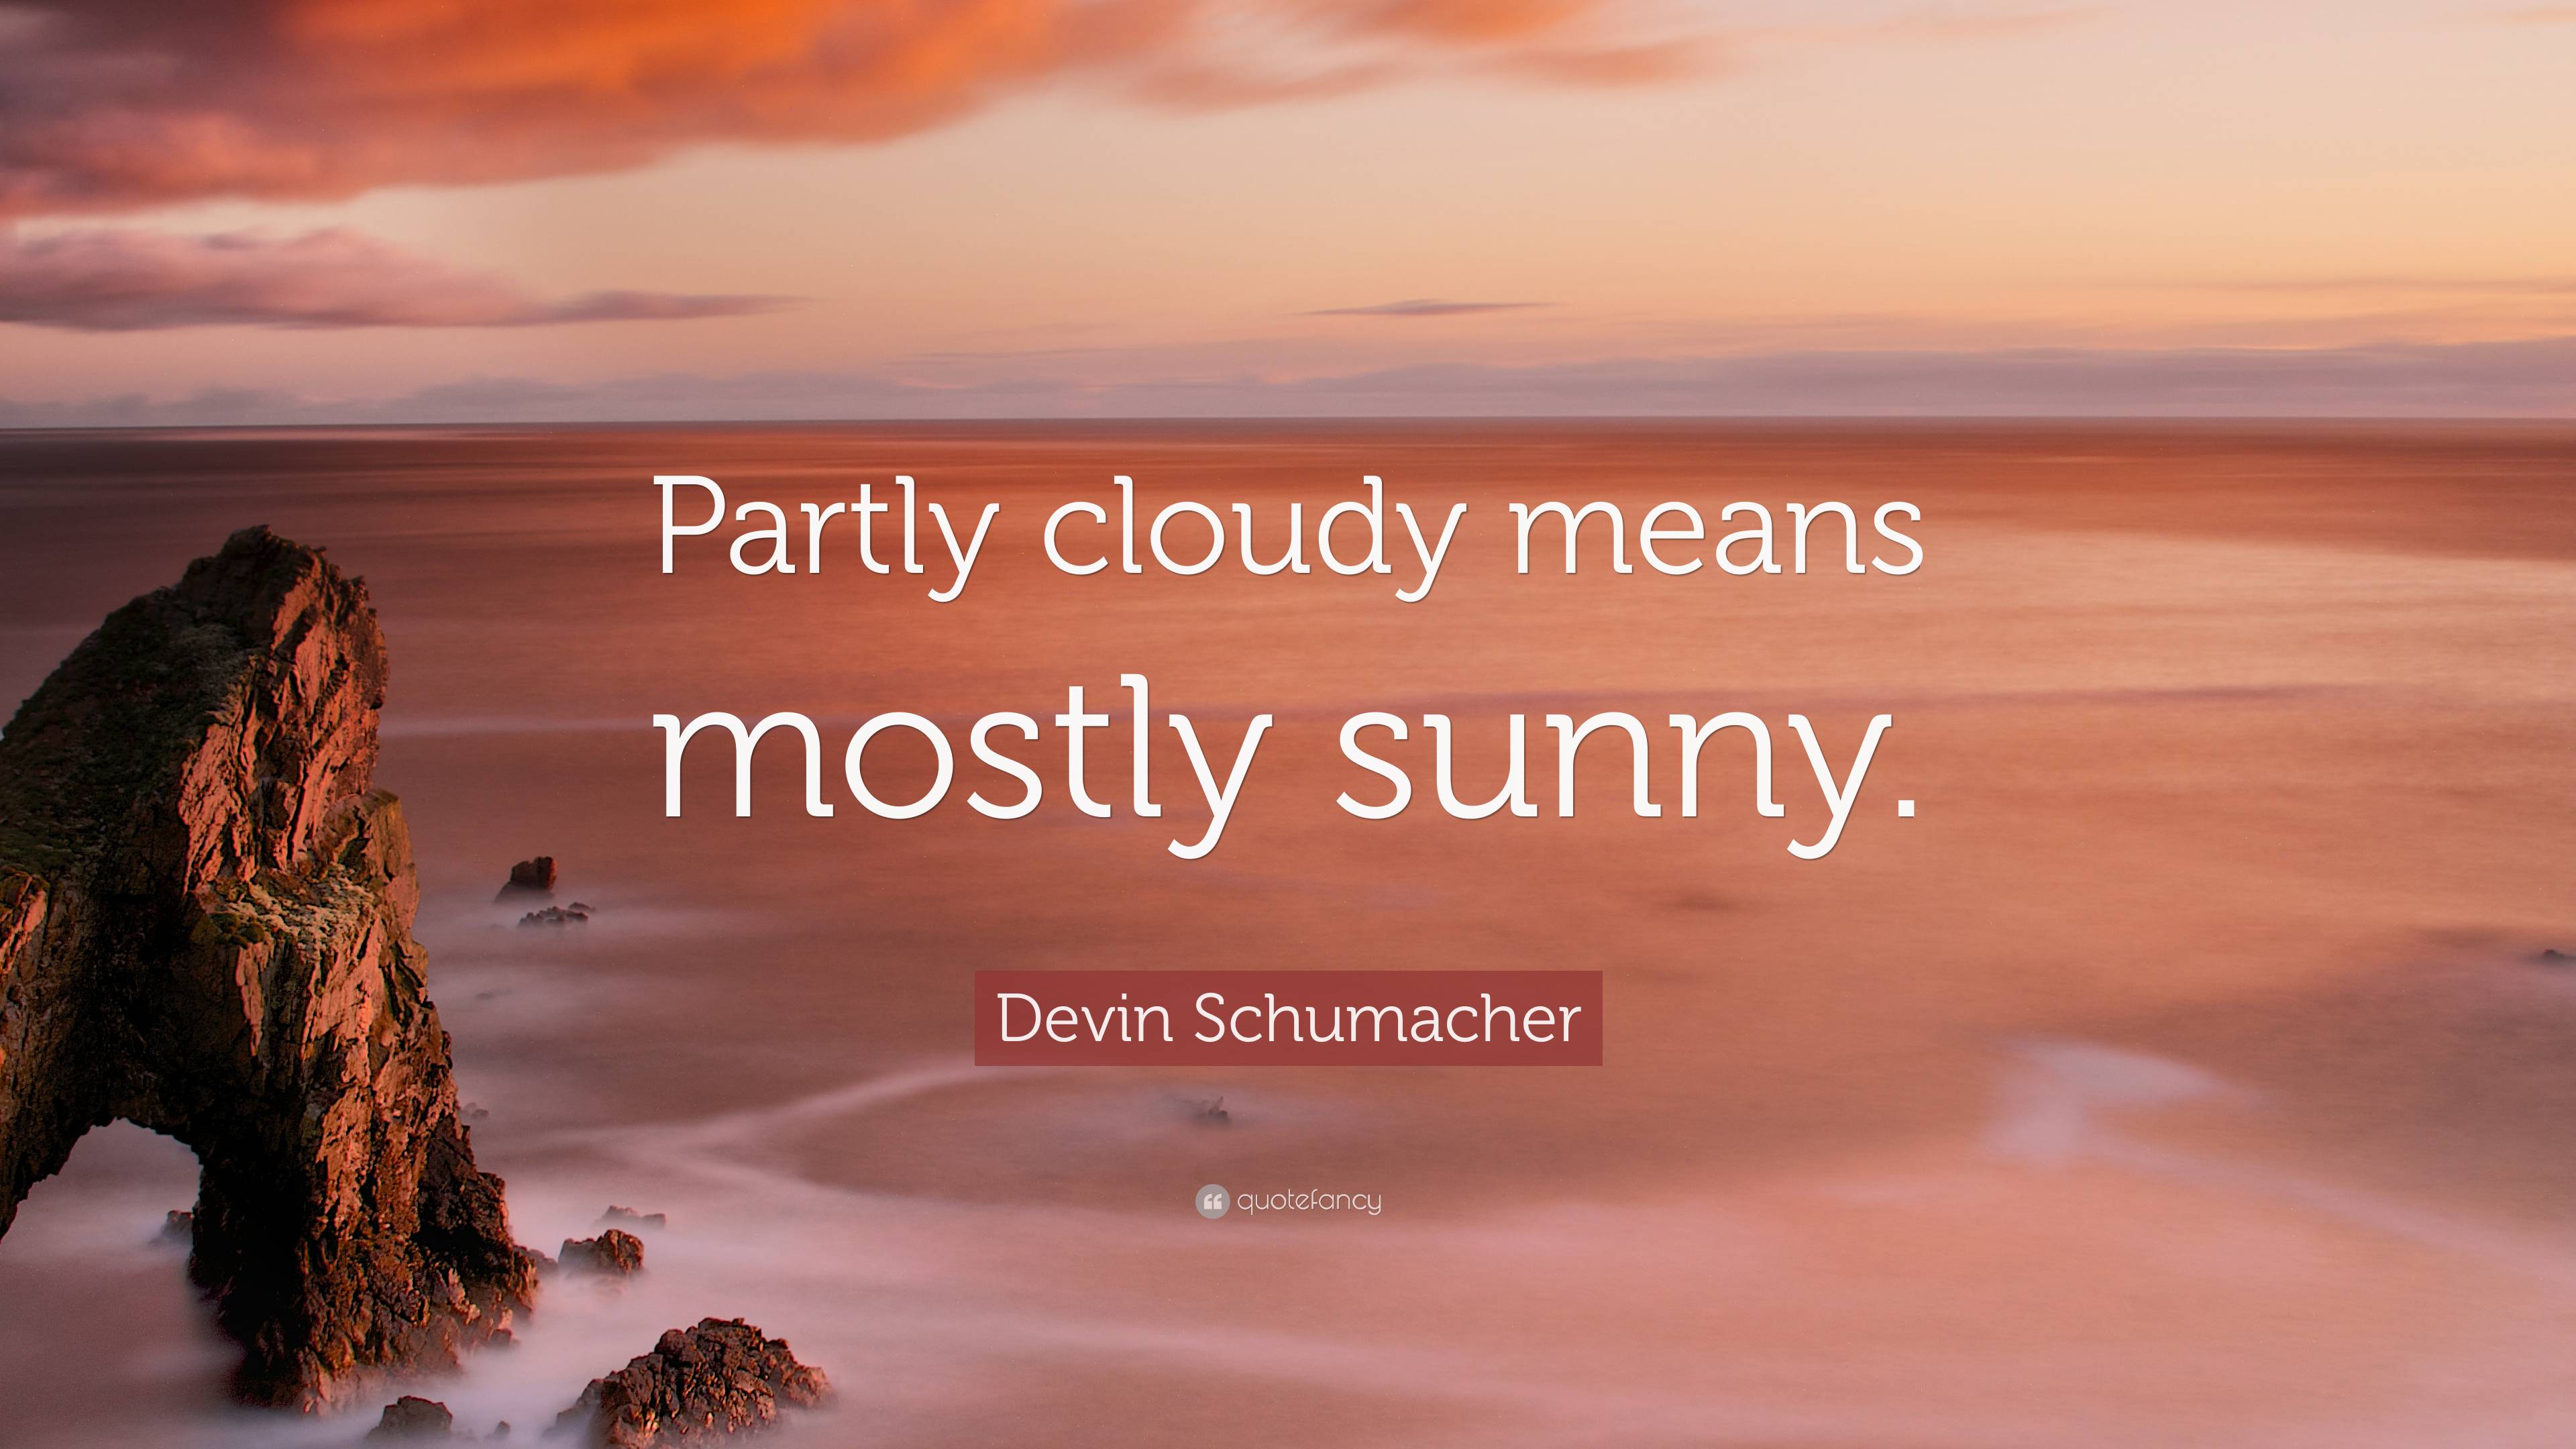 Is it partly cloudy or mostly cloudy?